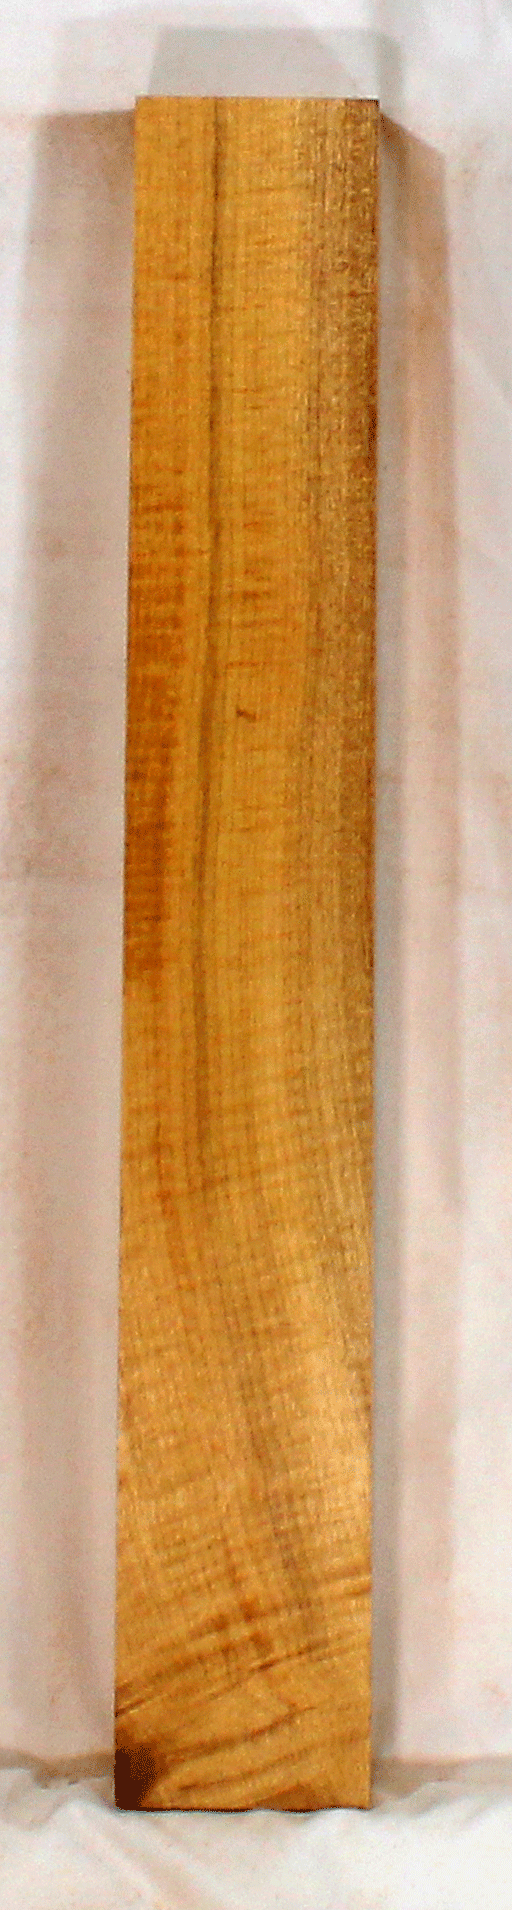 Myrtle Bow Handle